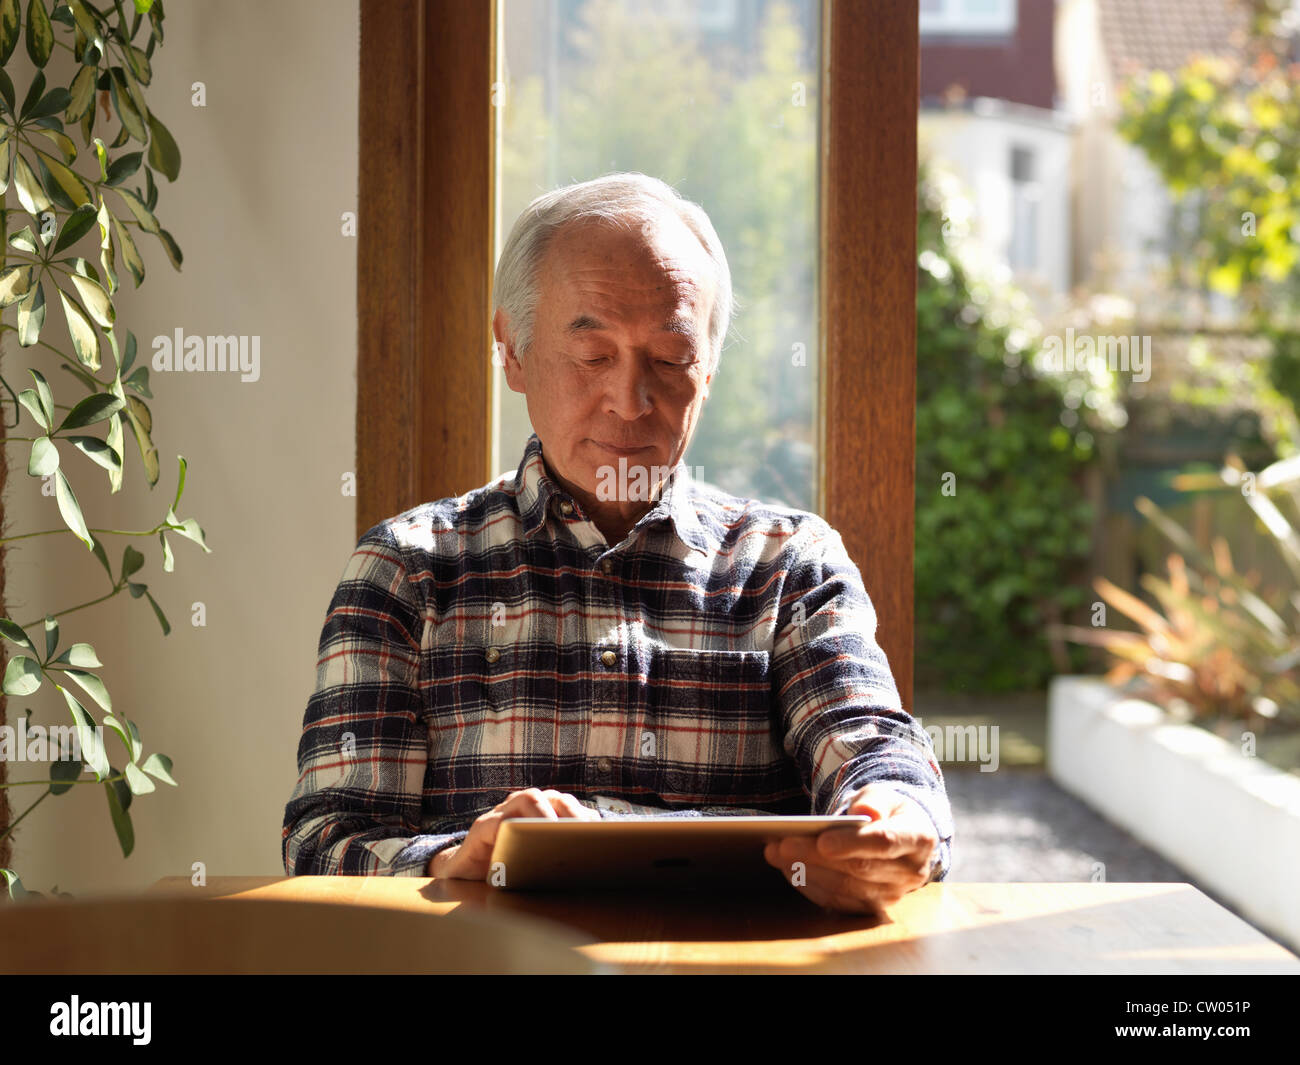 Older man using tablet computer at table Stock Photo